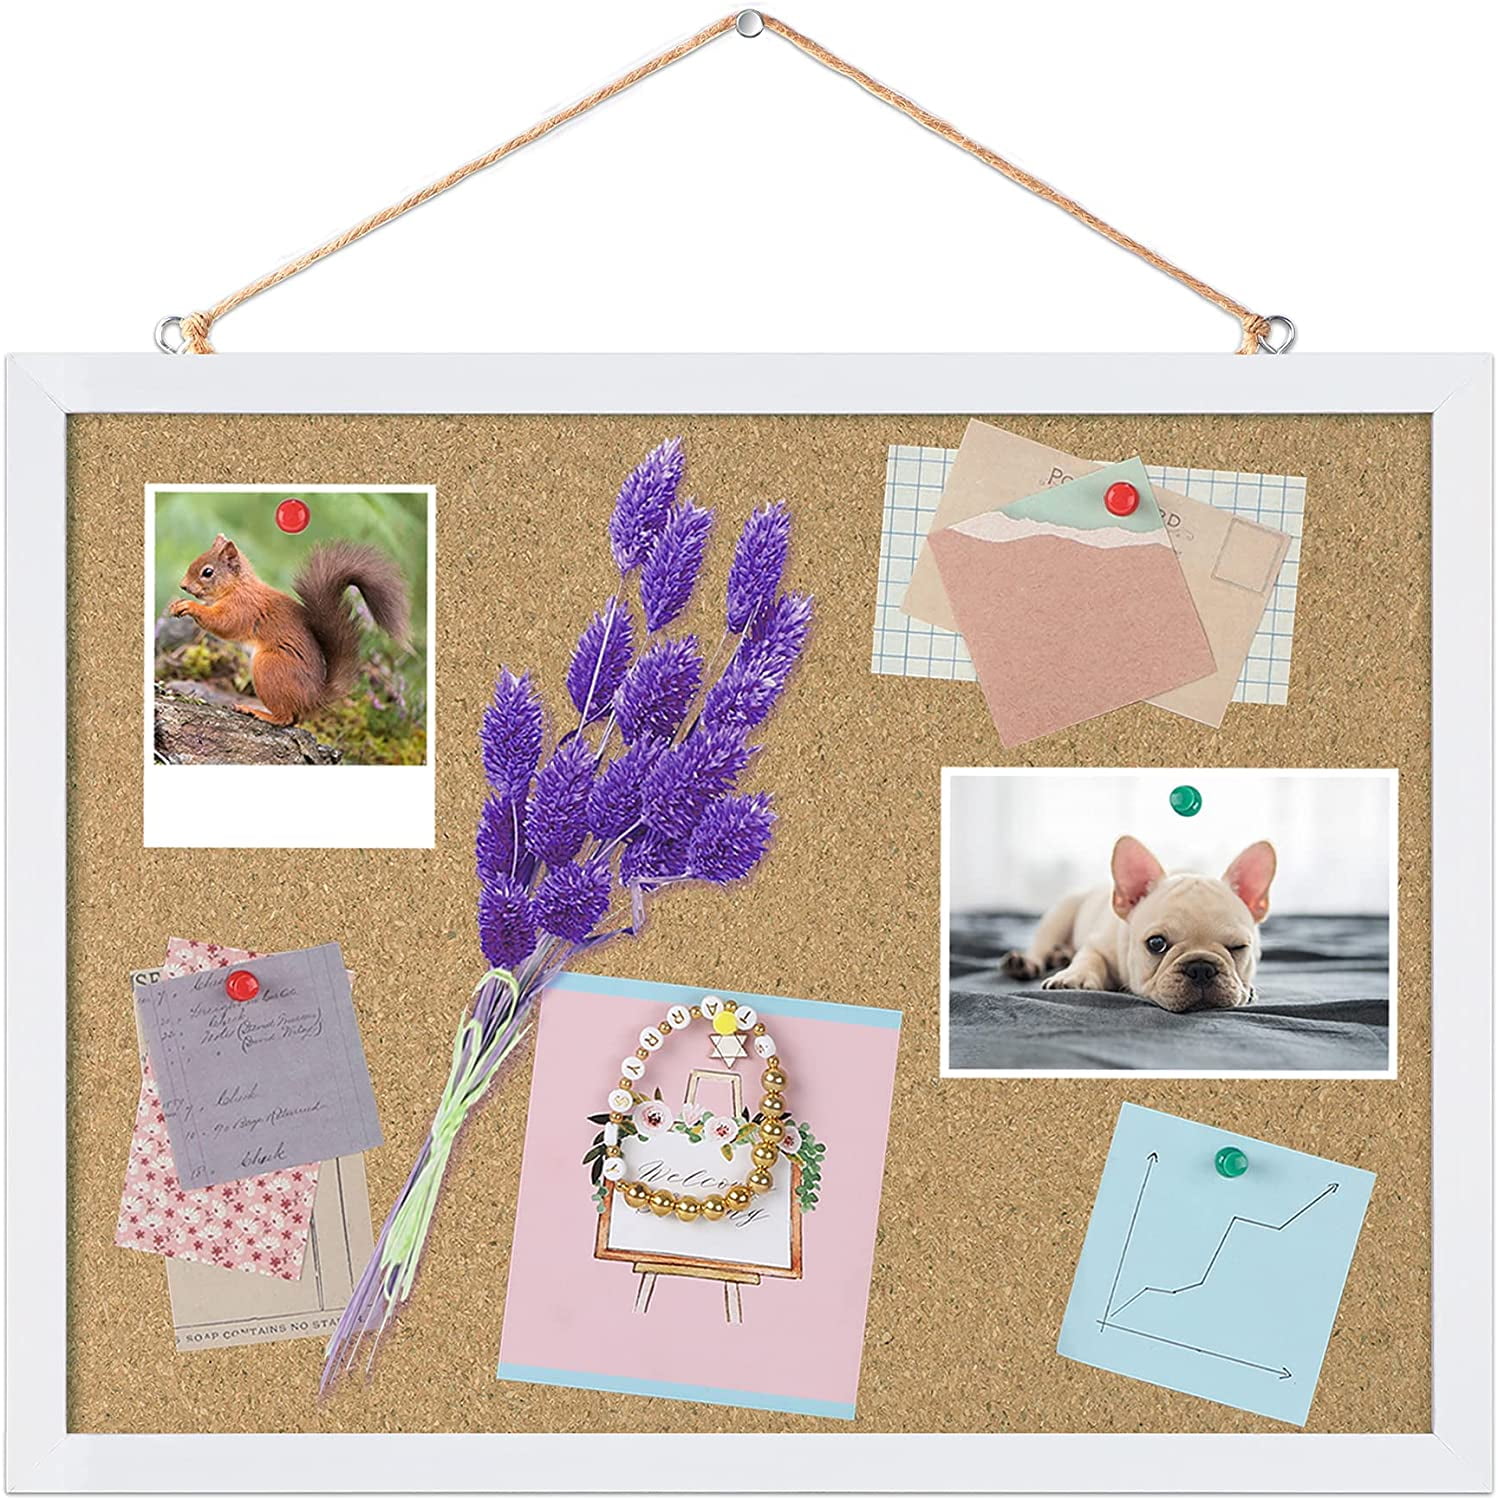 Cork Board Bulletin Board 11 x 17 Inch with Rectangle Frame Decorative Hanging 